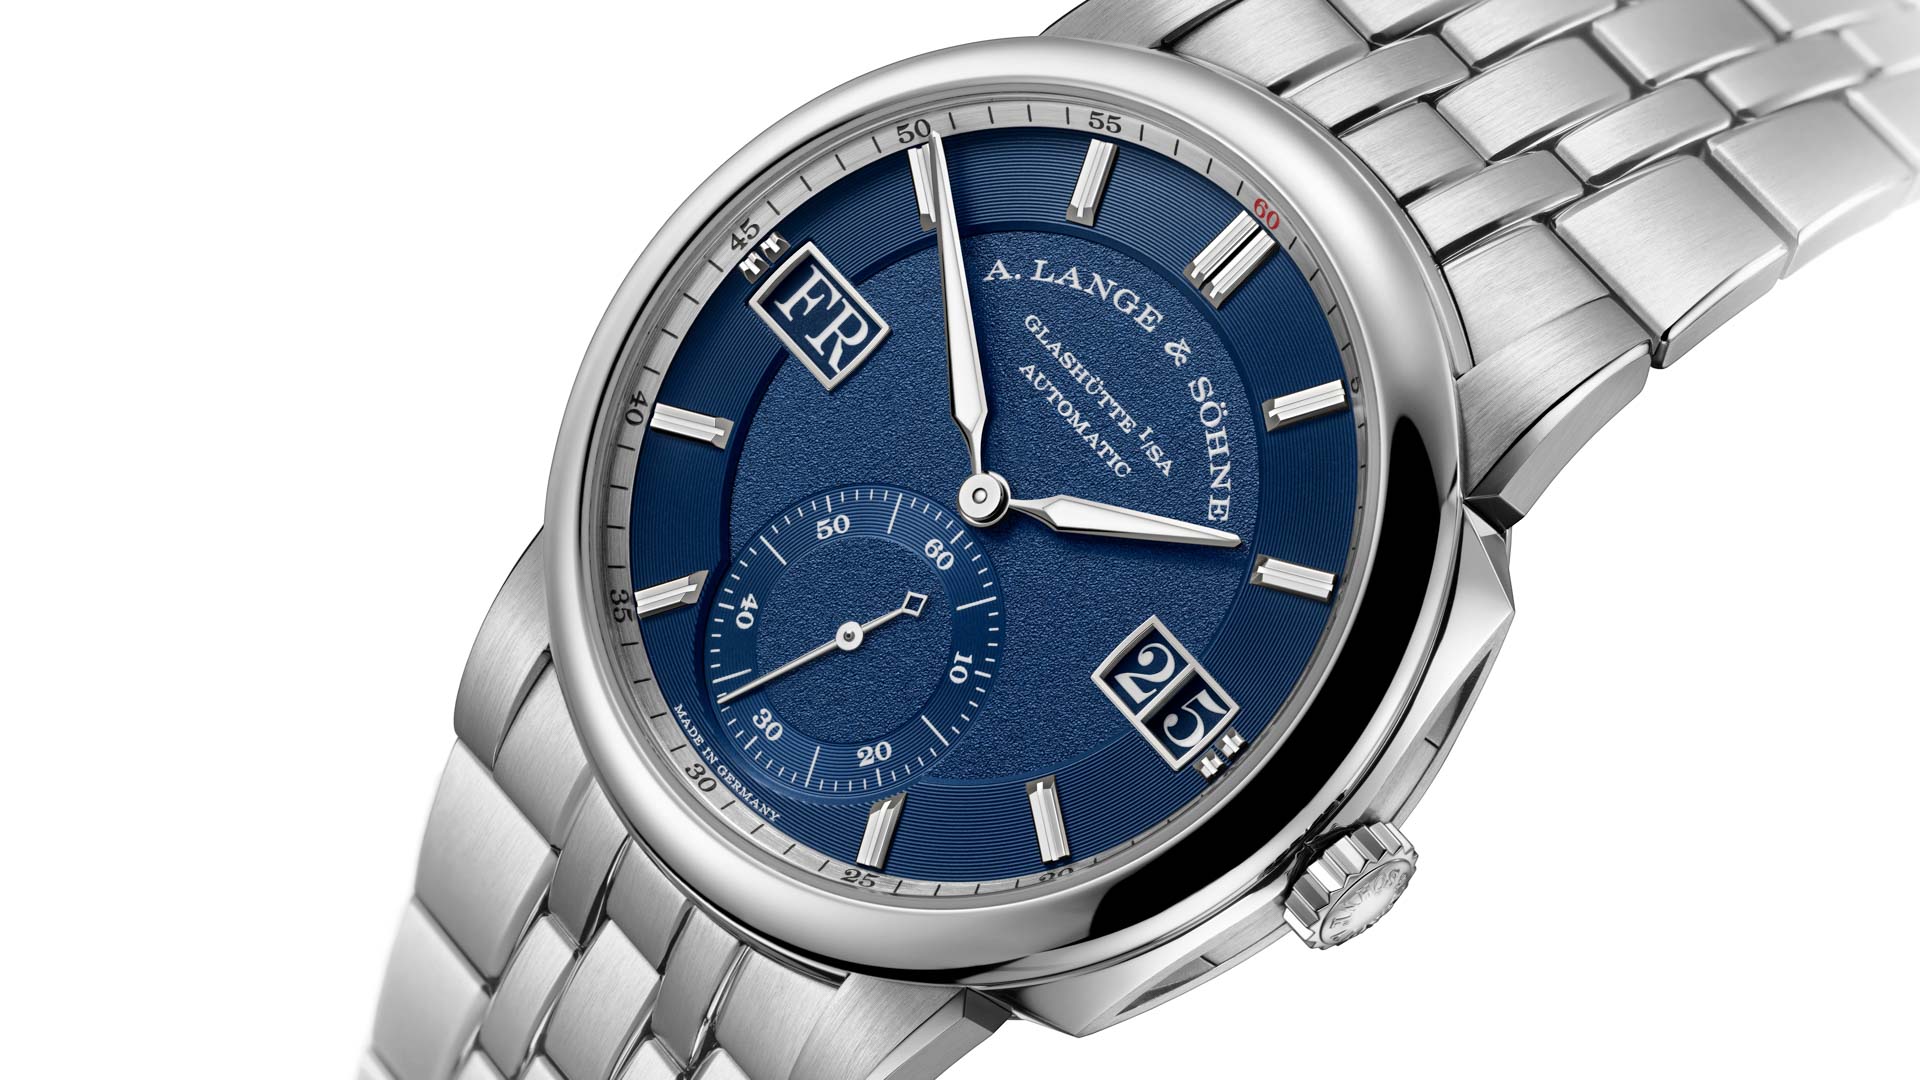 A. Lange & Söhne Odysseus Debuts First 120M Water Resistant Steel Sports Lange Watch